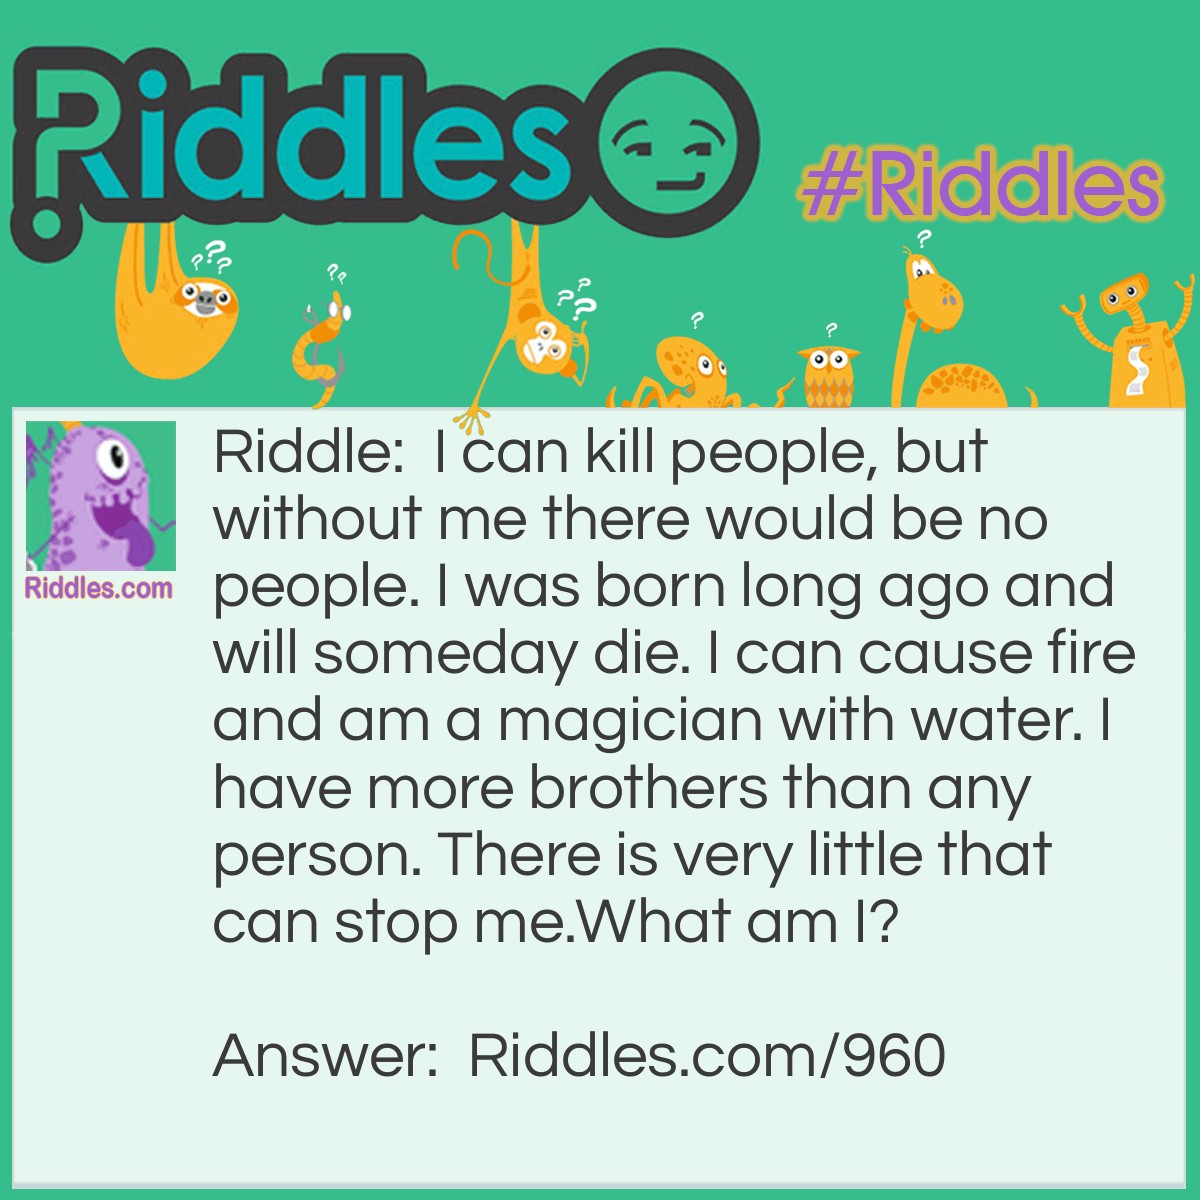 Riddle: I can kill people, but without me there would be no people. I was born long ago and will someday die. I can cause fire and am a magician with water. I have more brothers than any person. There is very little that can stop me.
What am I? Answer: A celestial body.